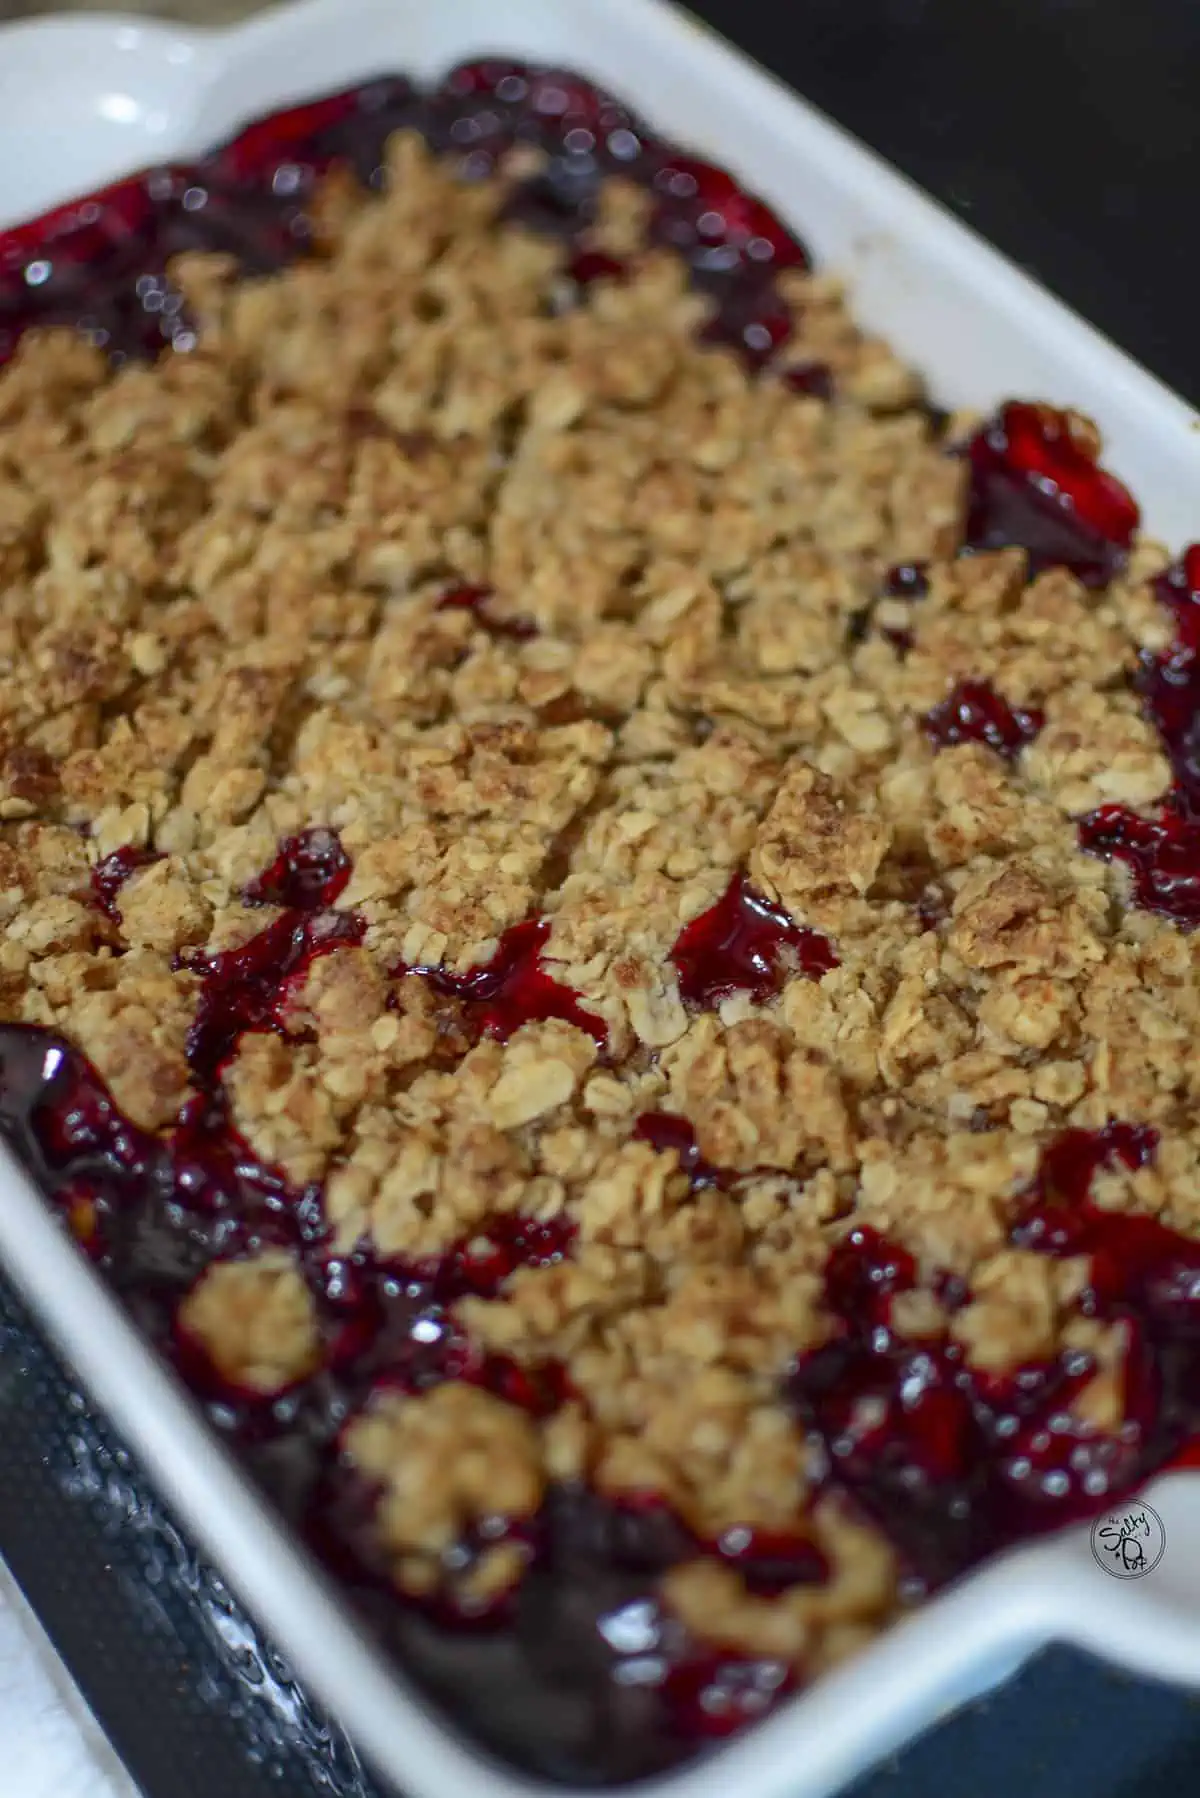 Sour cherry crisp dessert in the baking pan, fresh out of the oven.